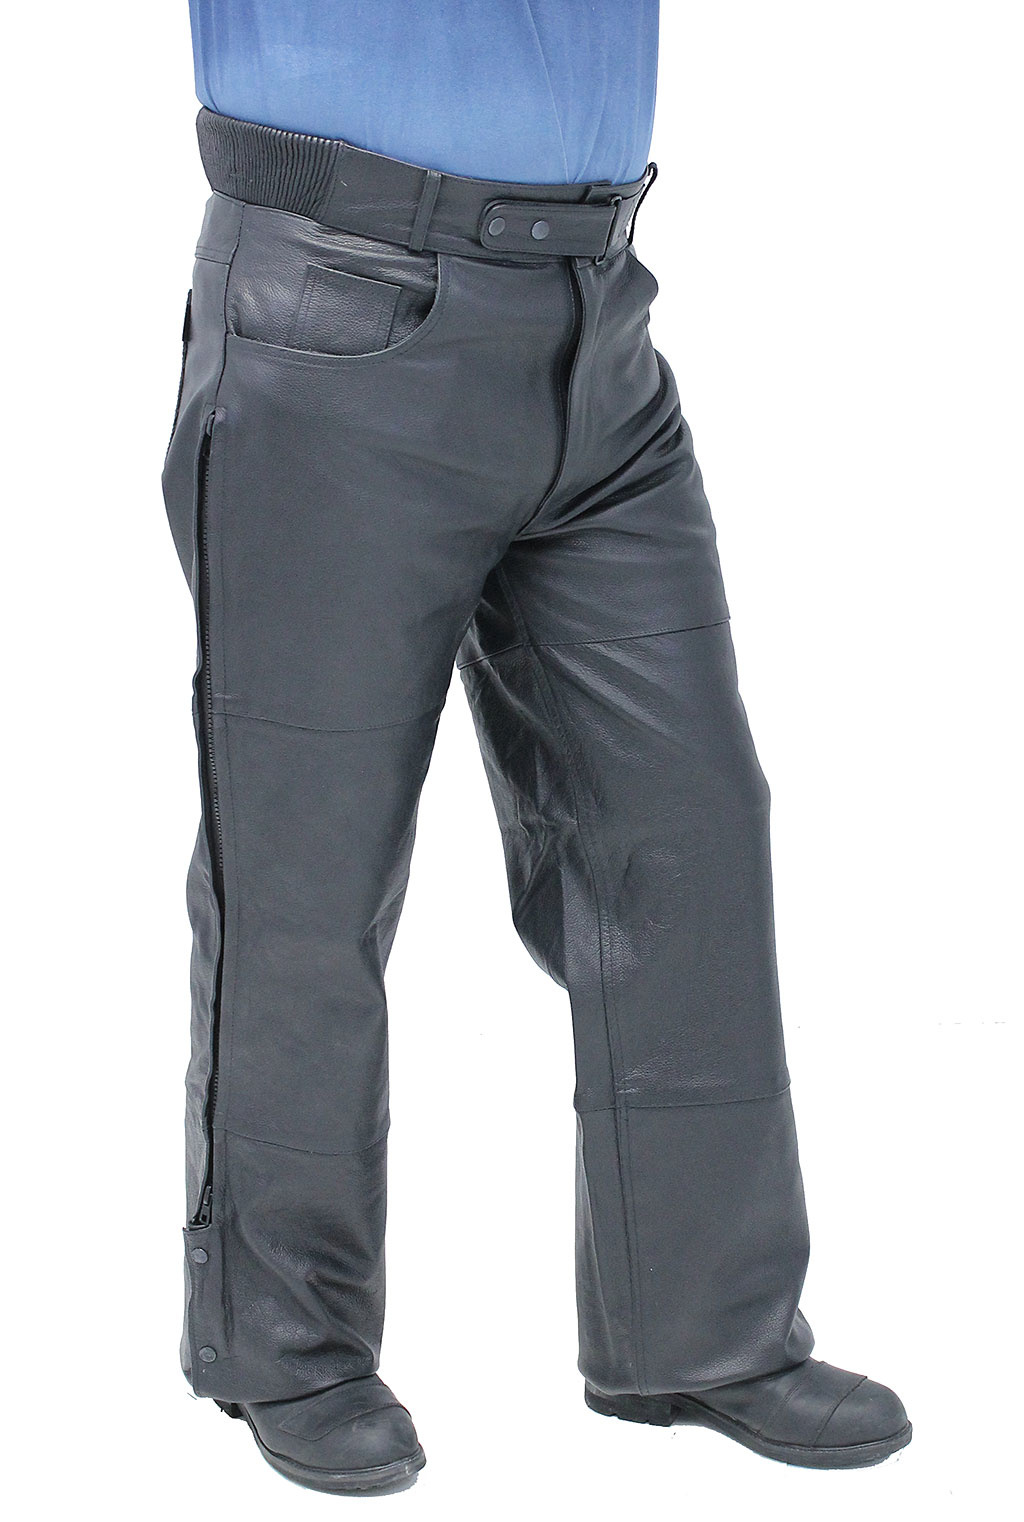 motorcycle style pants